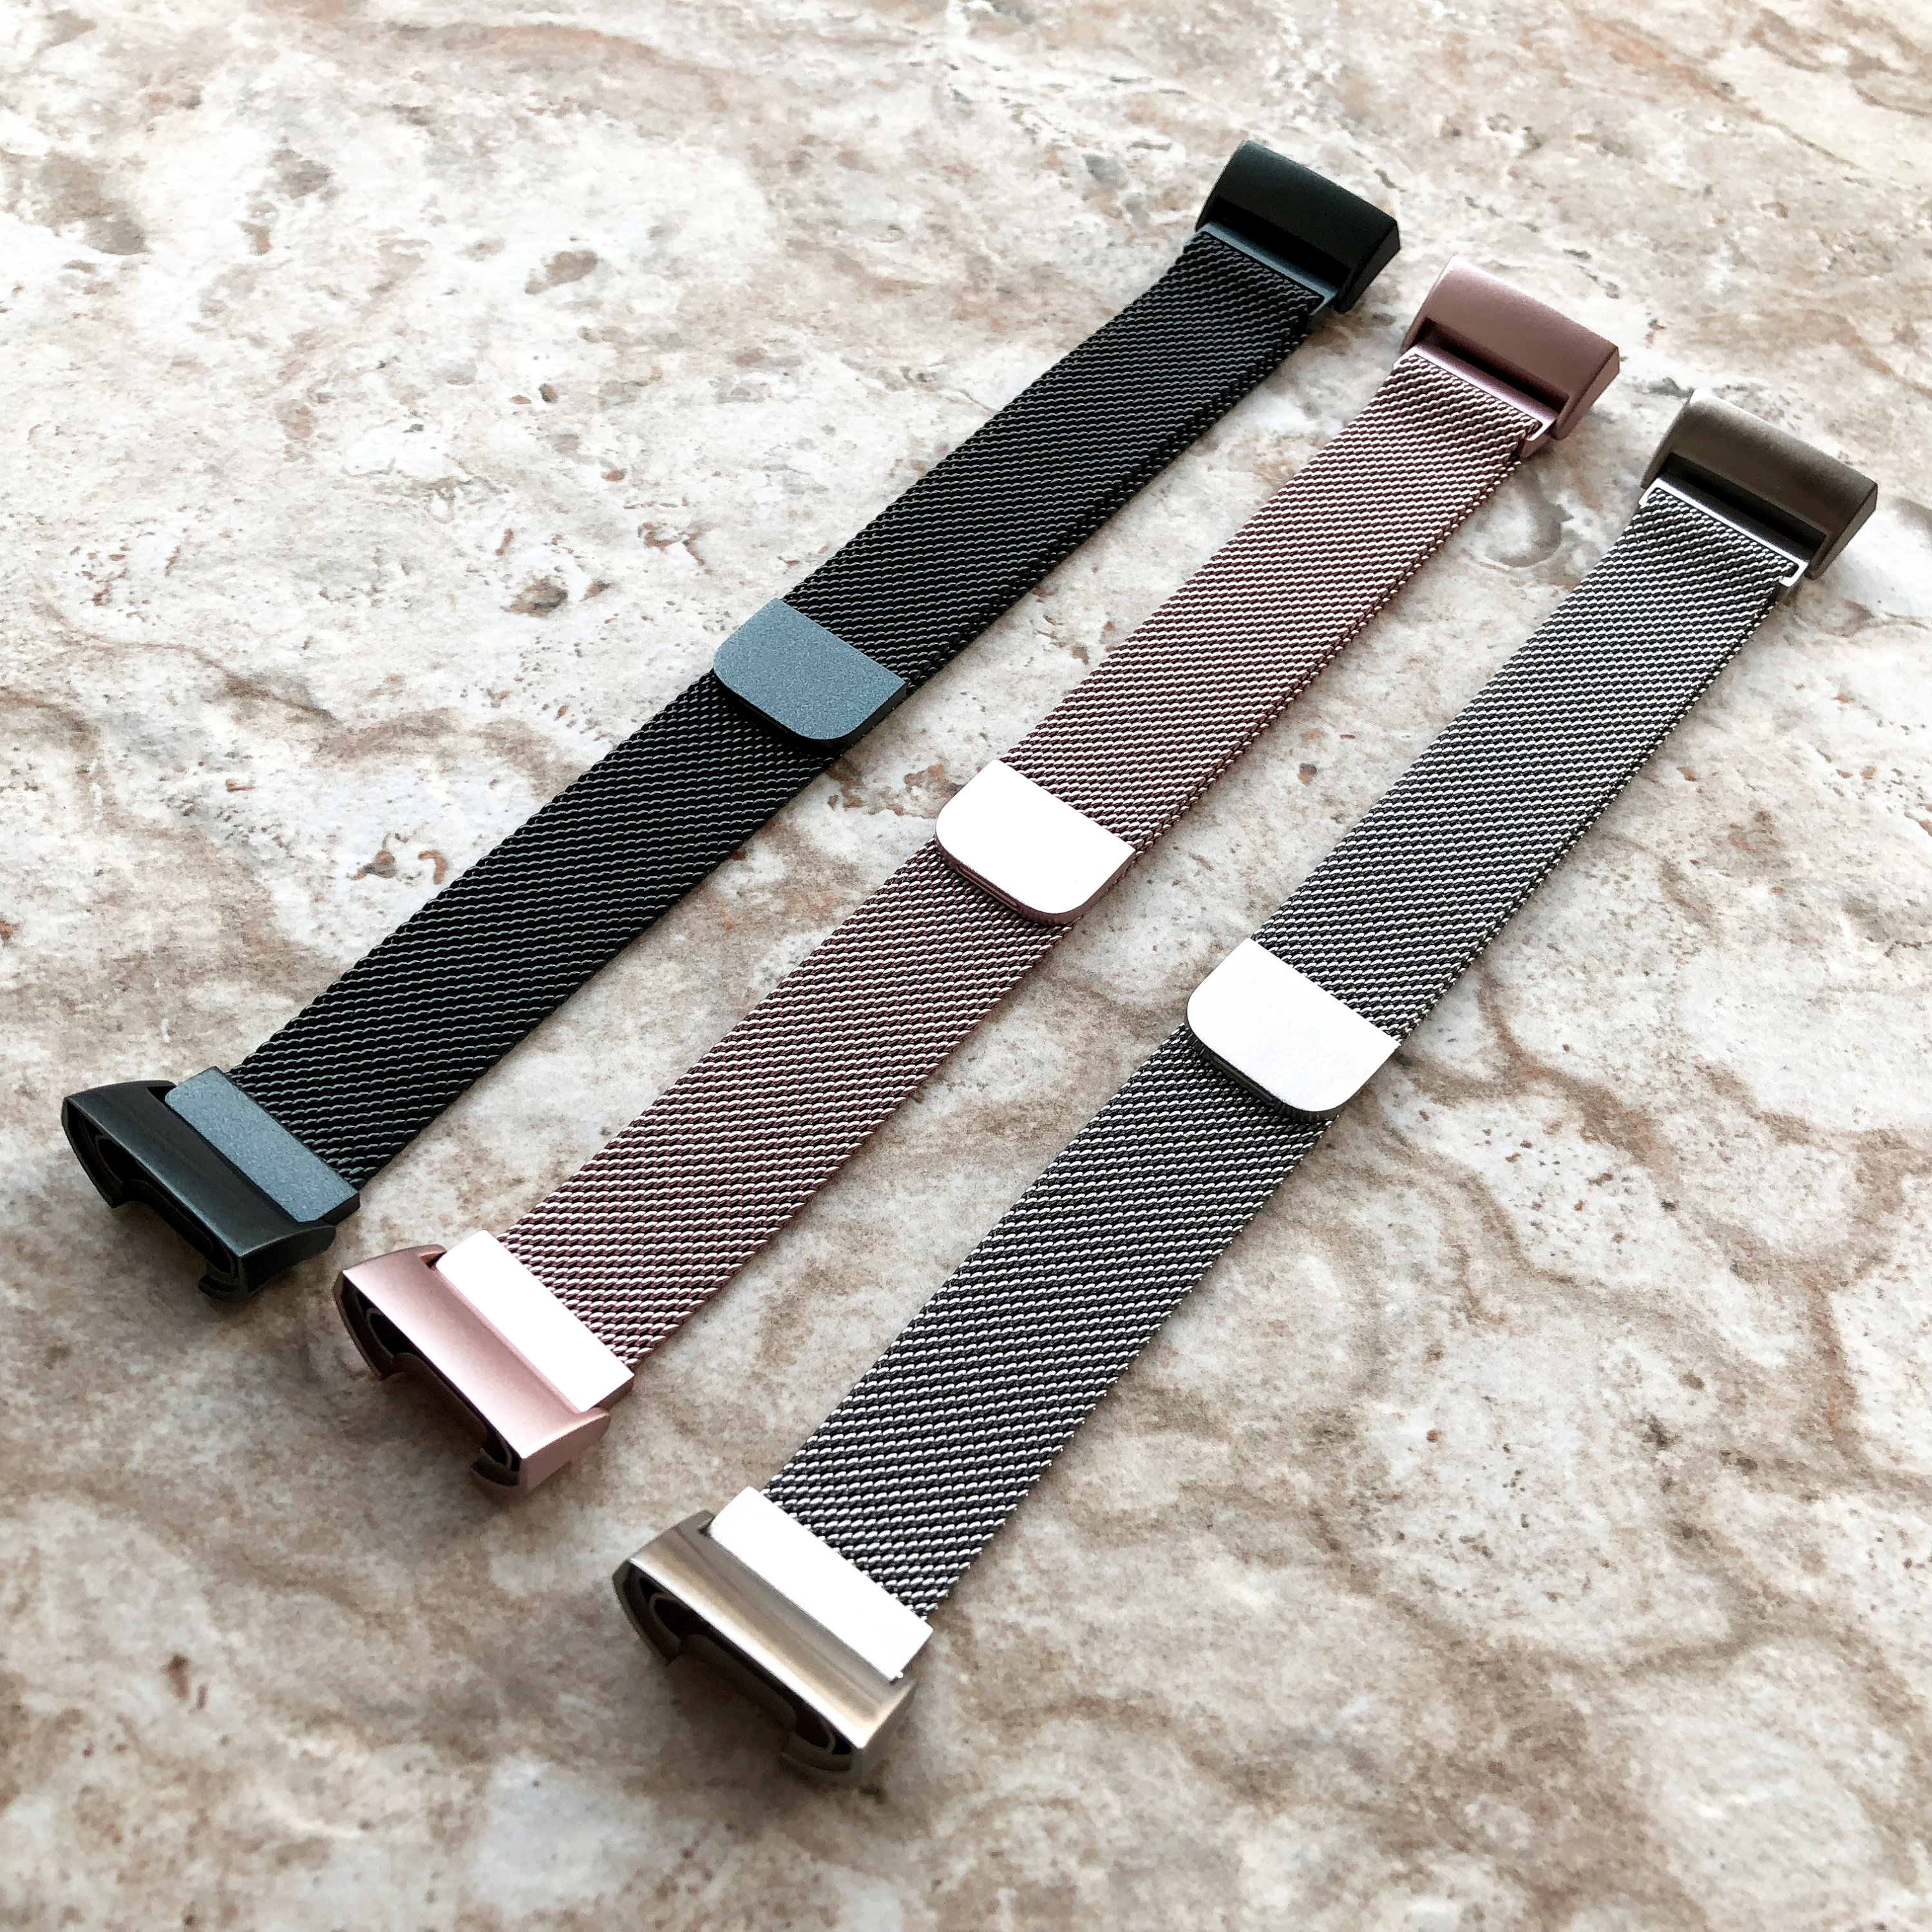 magnetic band for fitbit charge 3